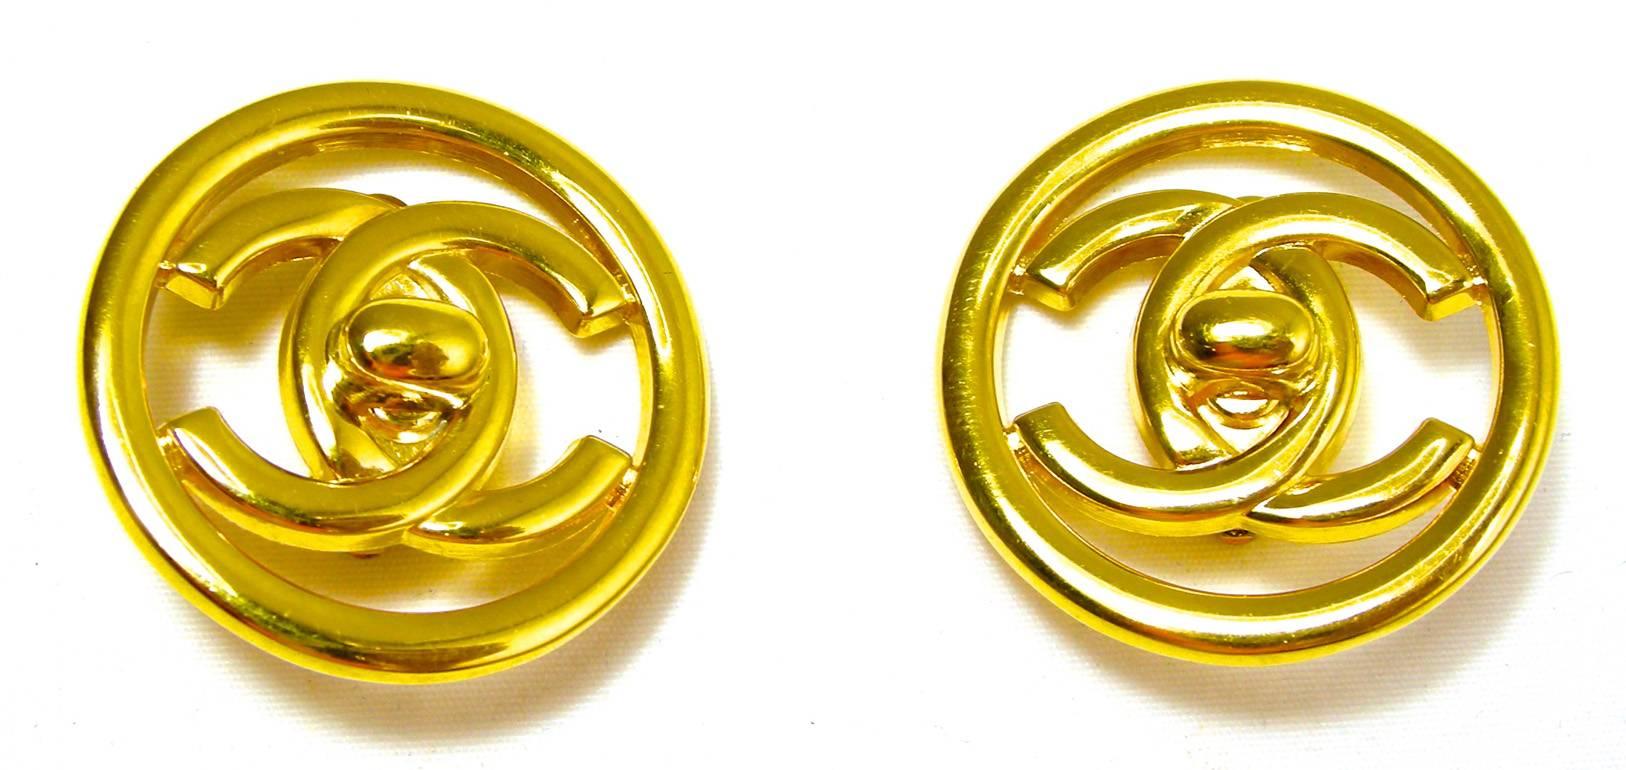 These signed vintage Chanel earrings  feature the famous CC logo in a gold-tone setting.  These clip earrings measure 1-1/4” in diameter and are signed “Chanel 97P Made in France”. They are in excellent condition. 
